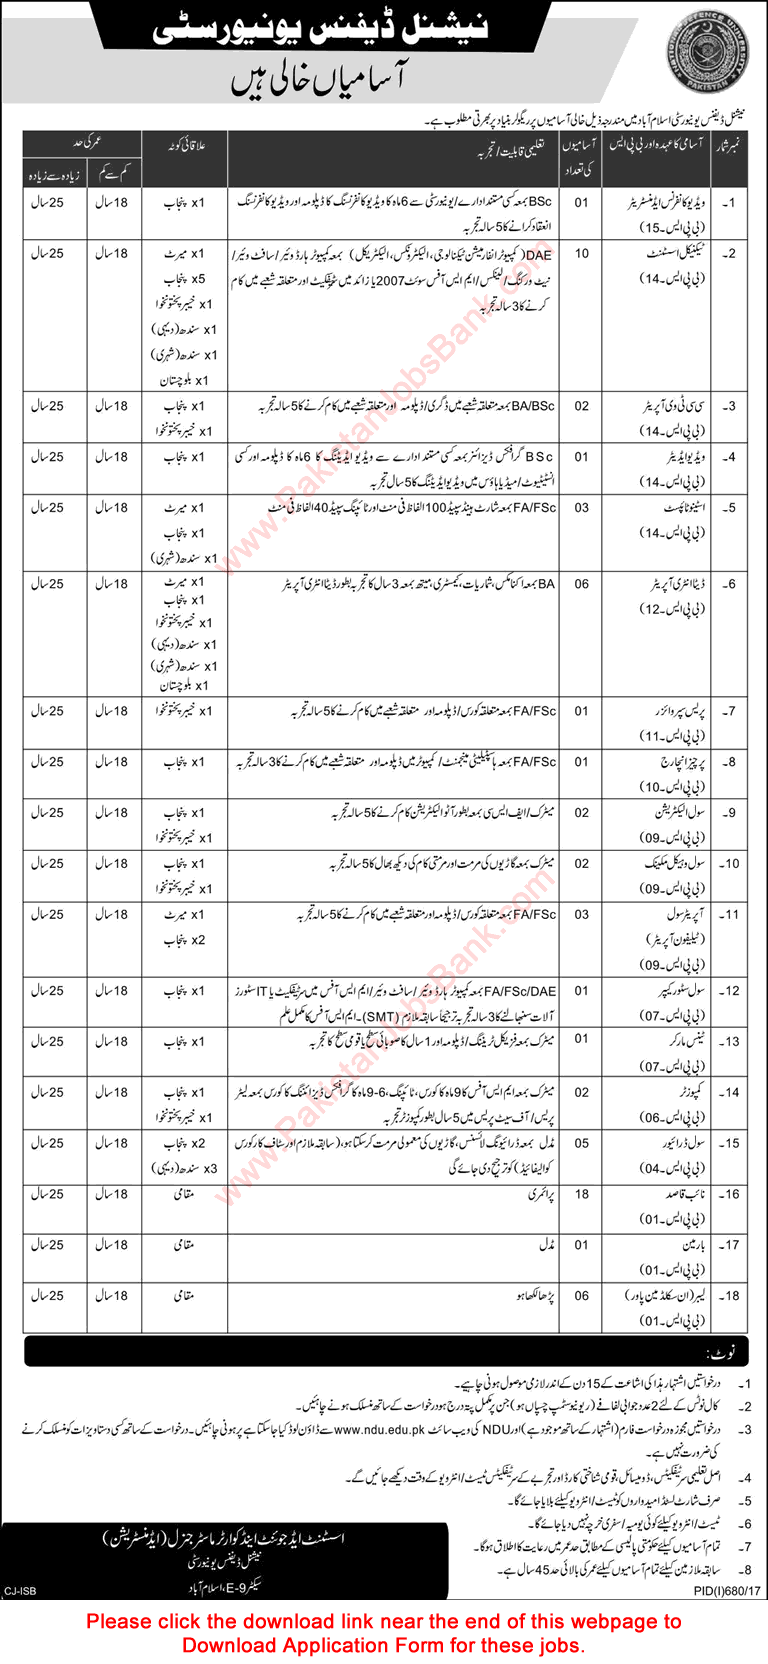 National Defence University Islamabad Jobs 2017 August Application Form Technical Assistants, Naib Qasid & Others Latest